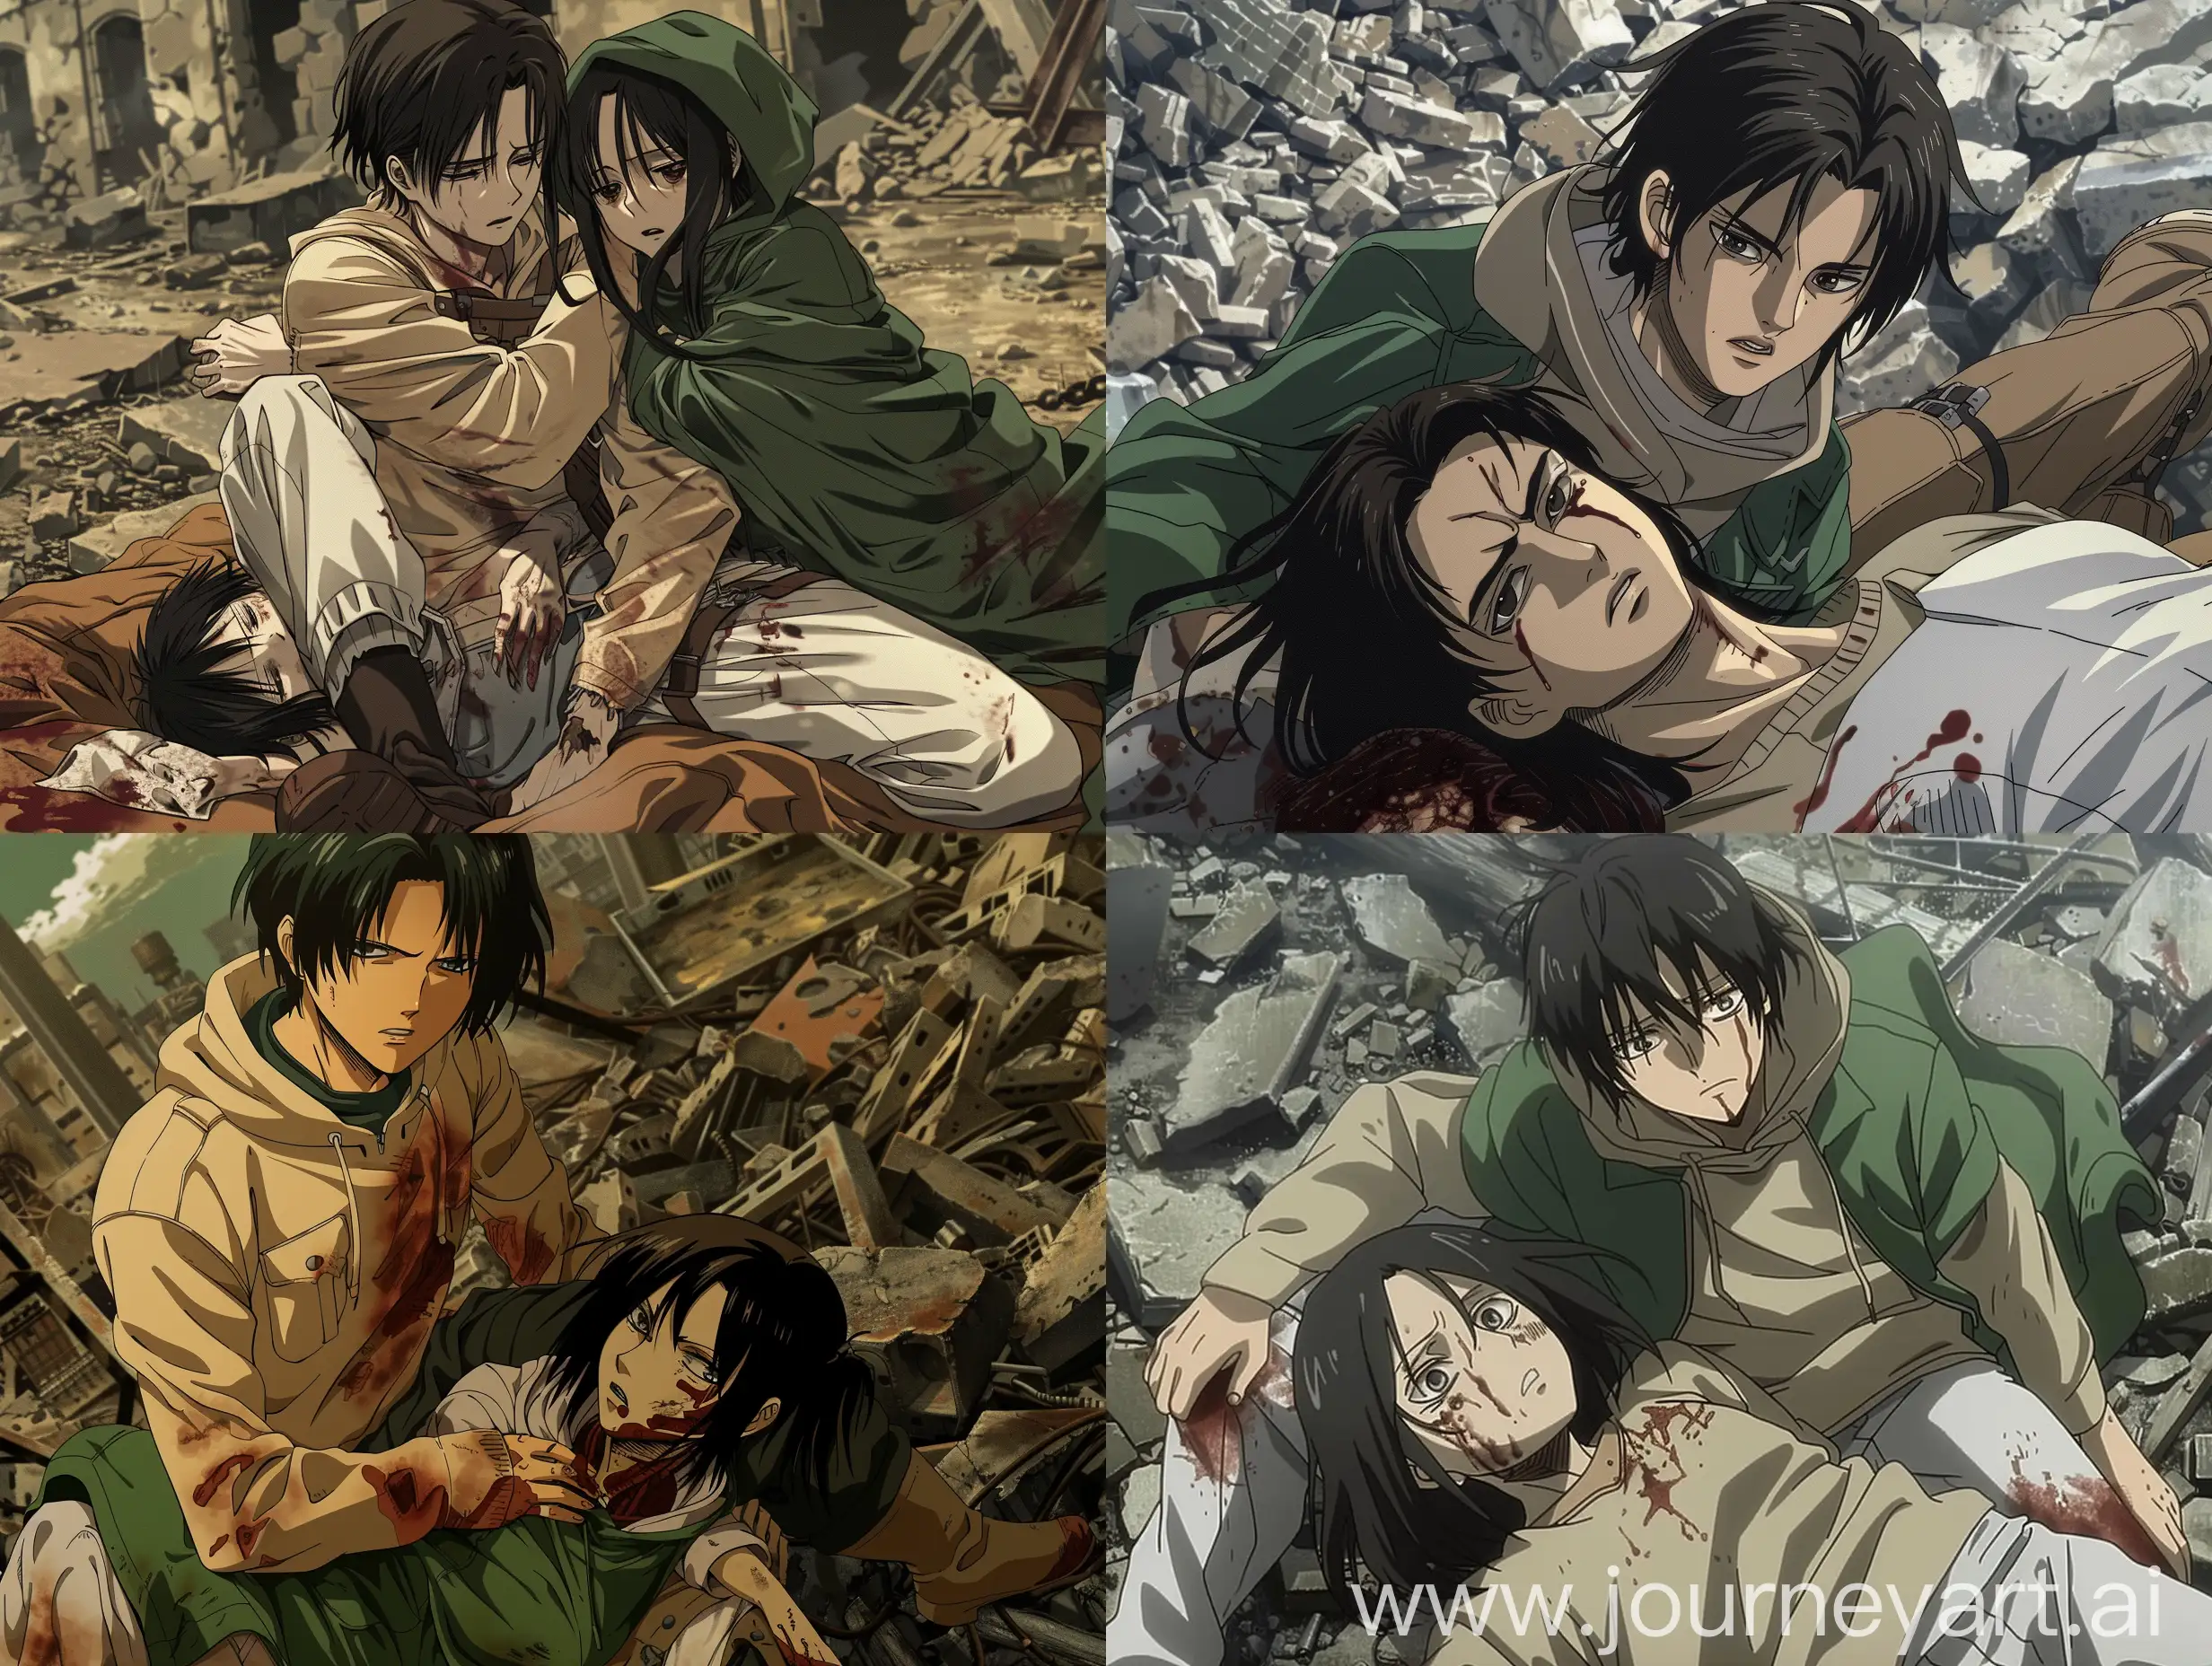 The man Levi Ackerman from the anime "Attack of the Titans" holds Mikasa Ackerman, a girl with shoulder-length black hair. Levi, in a beige sweatshirt, white trousers, a green raincoat and brown knee-high boots, looks straight into the frame. Mikasa is lying unconscious in a beige sweatshirt, white trousers, a green raincoat and brown knee-high boots covered in blood. There is a ruined city all around